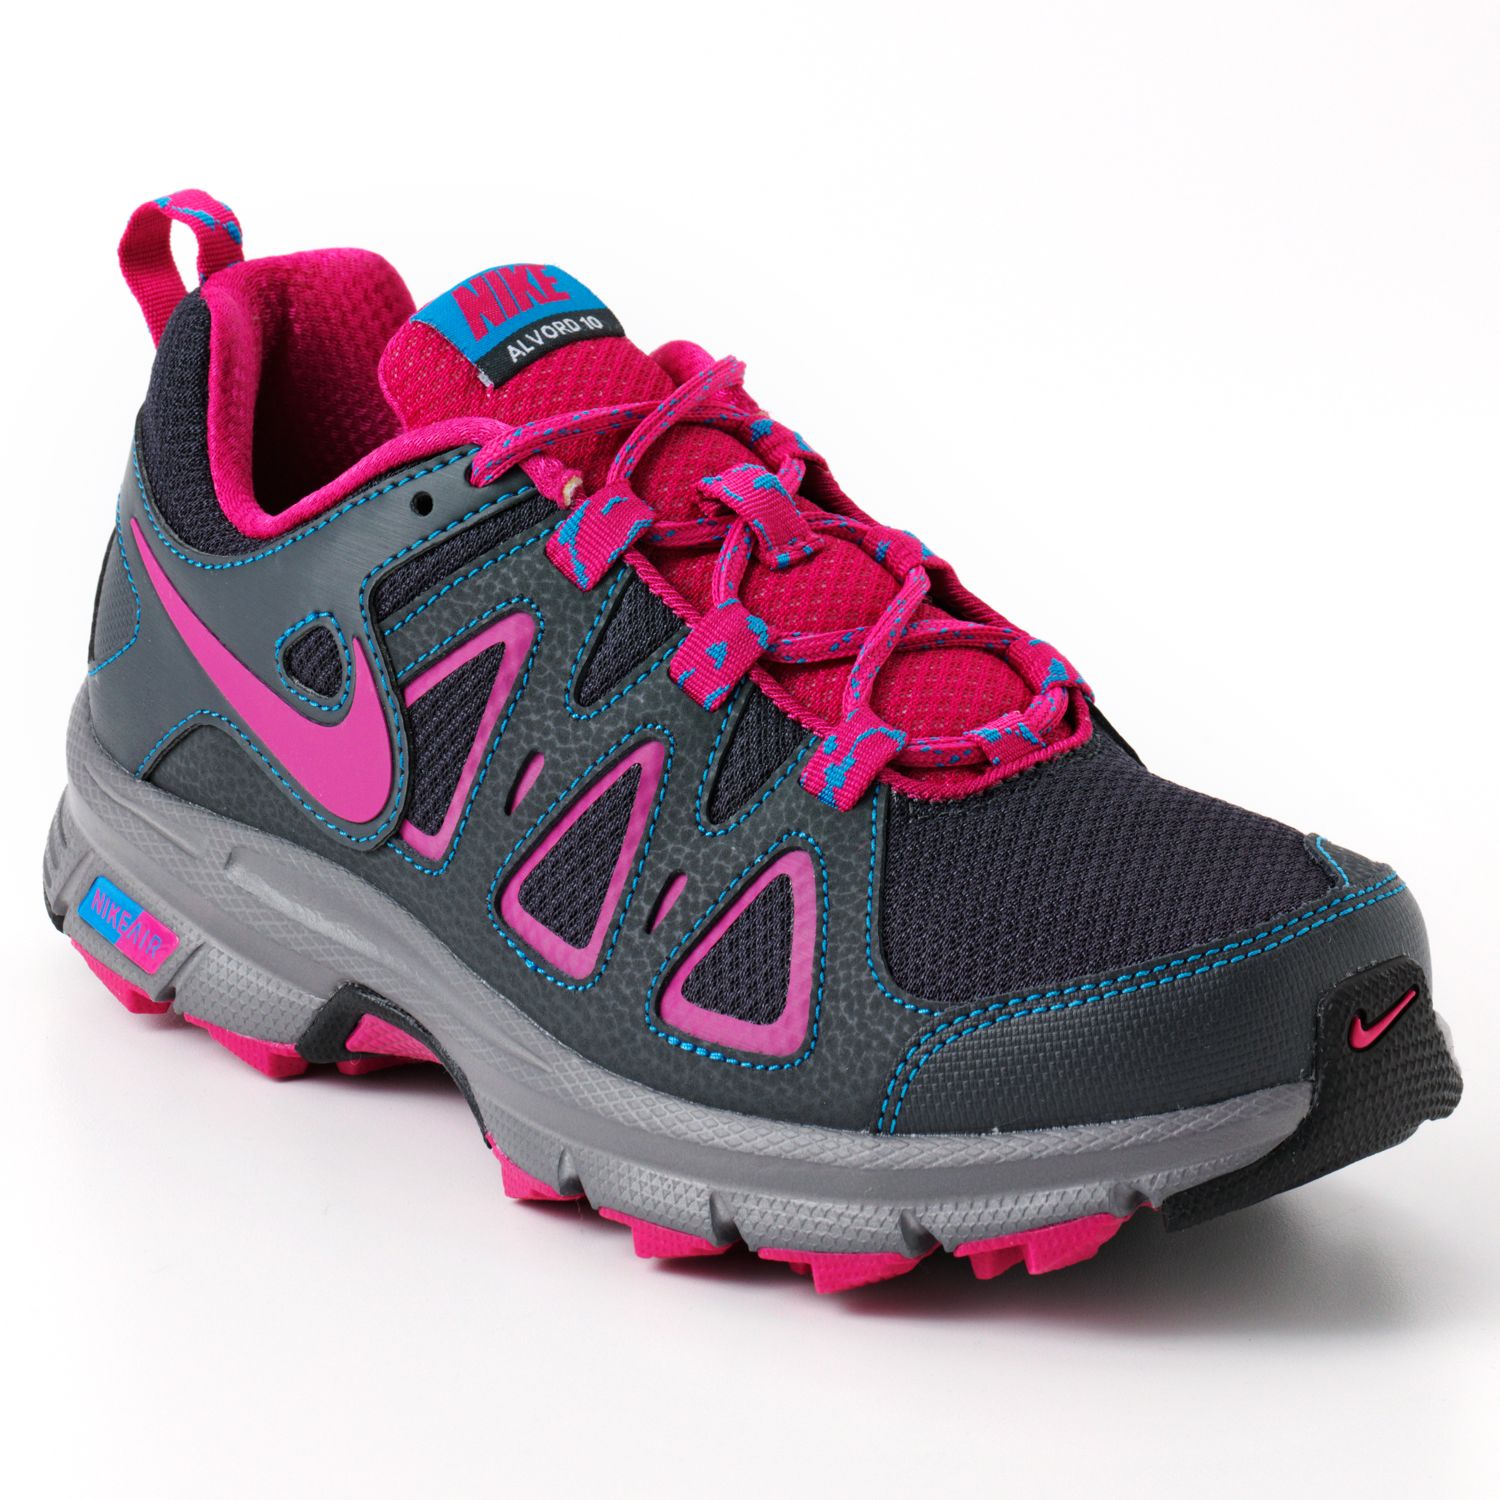 Nike Air Alvord 10 Trail Running Shoes 